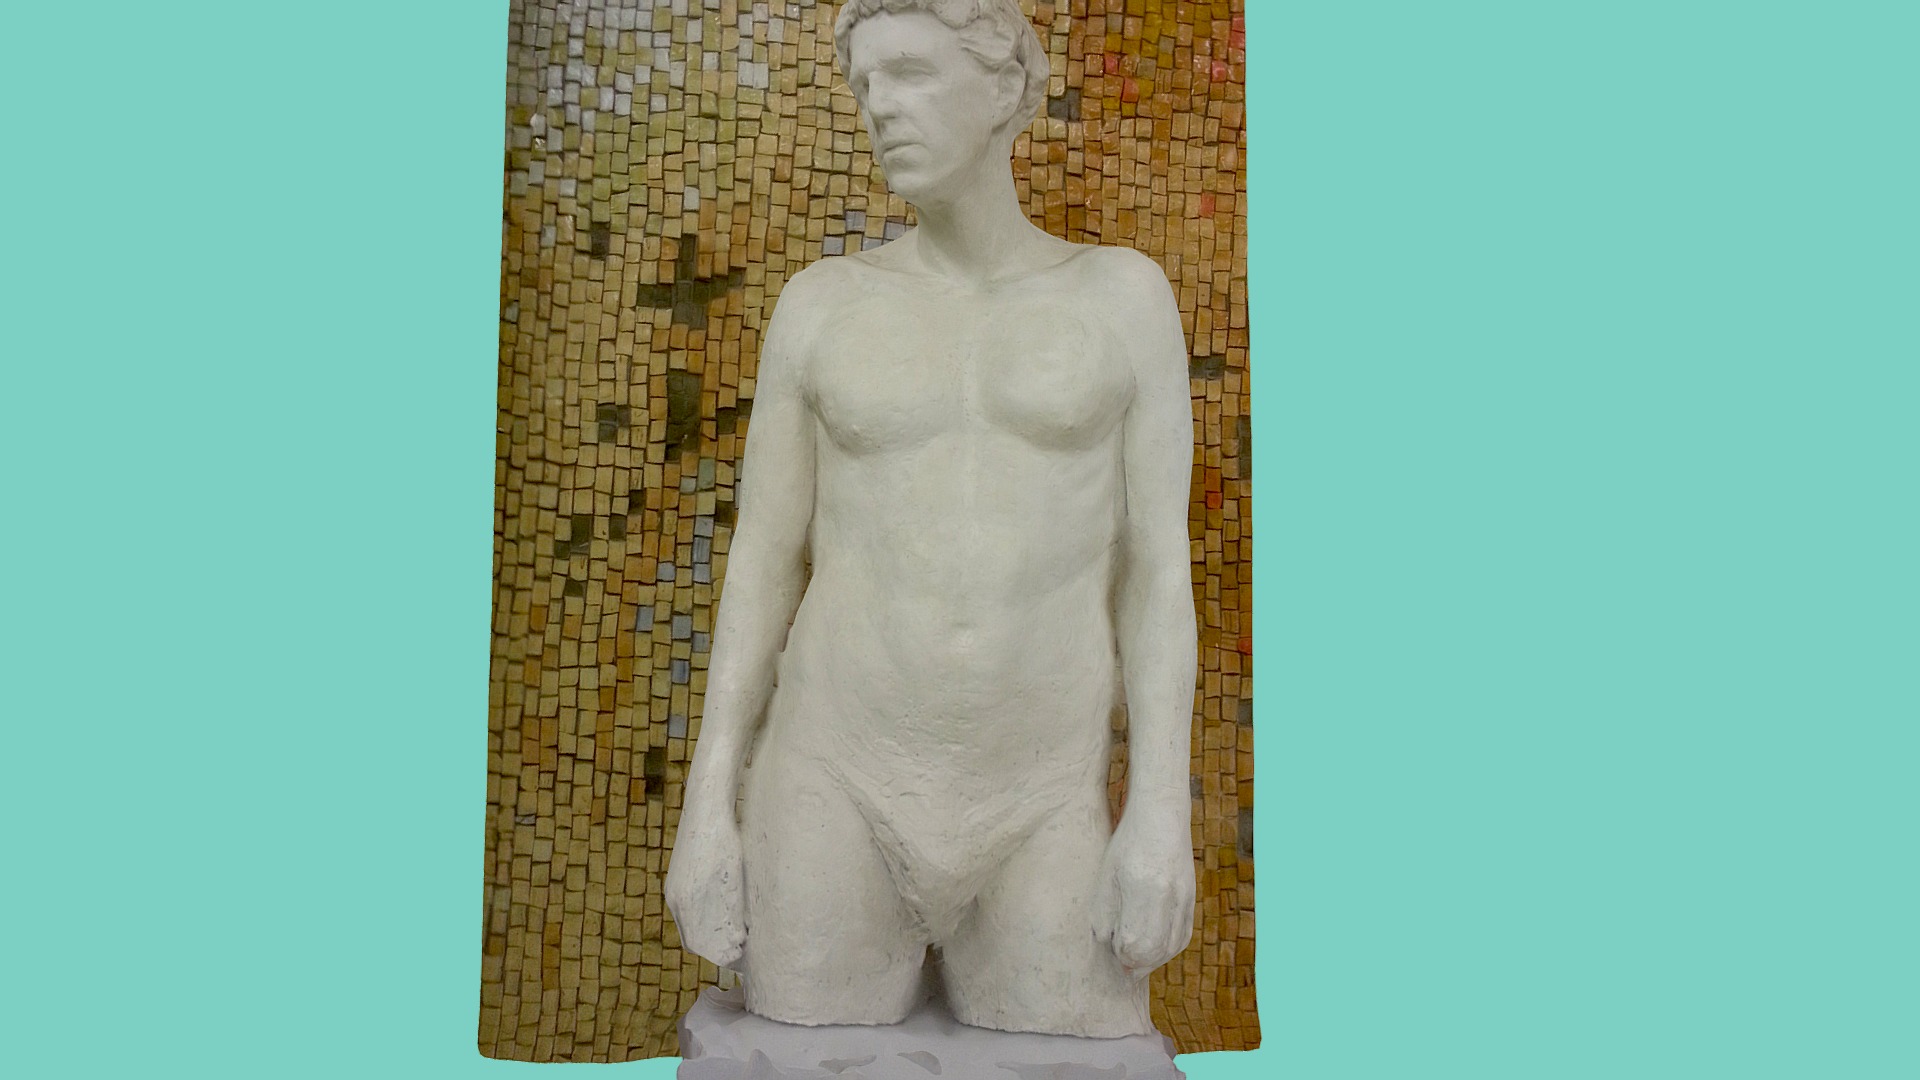 3D model sculpture - This is a 3D model of the sculpture. The 3D model is about a statue of a person.